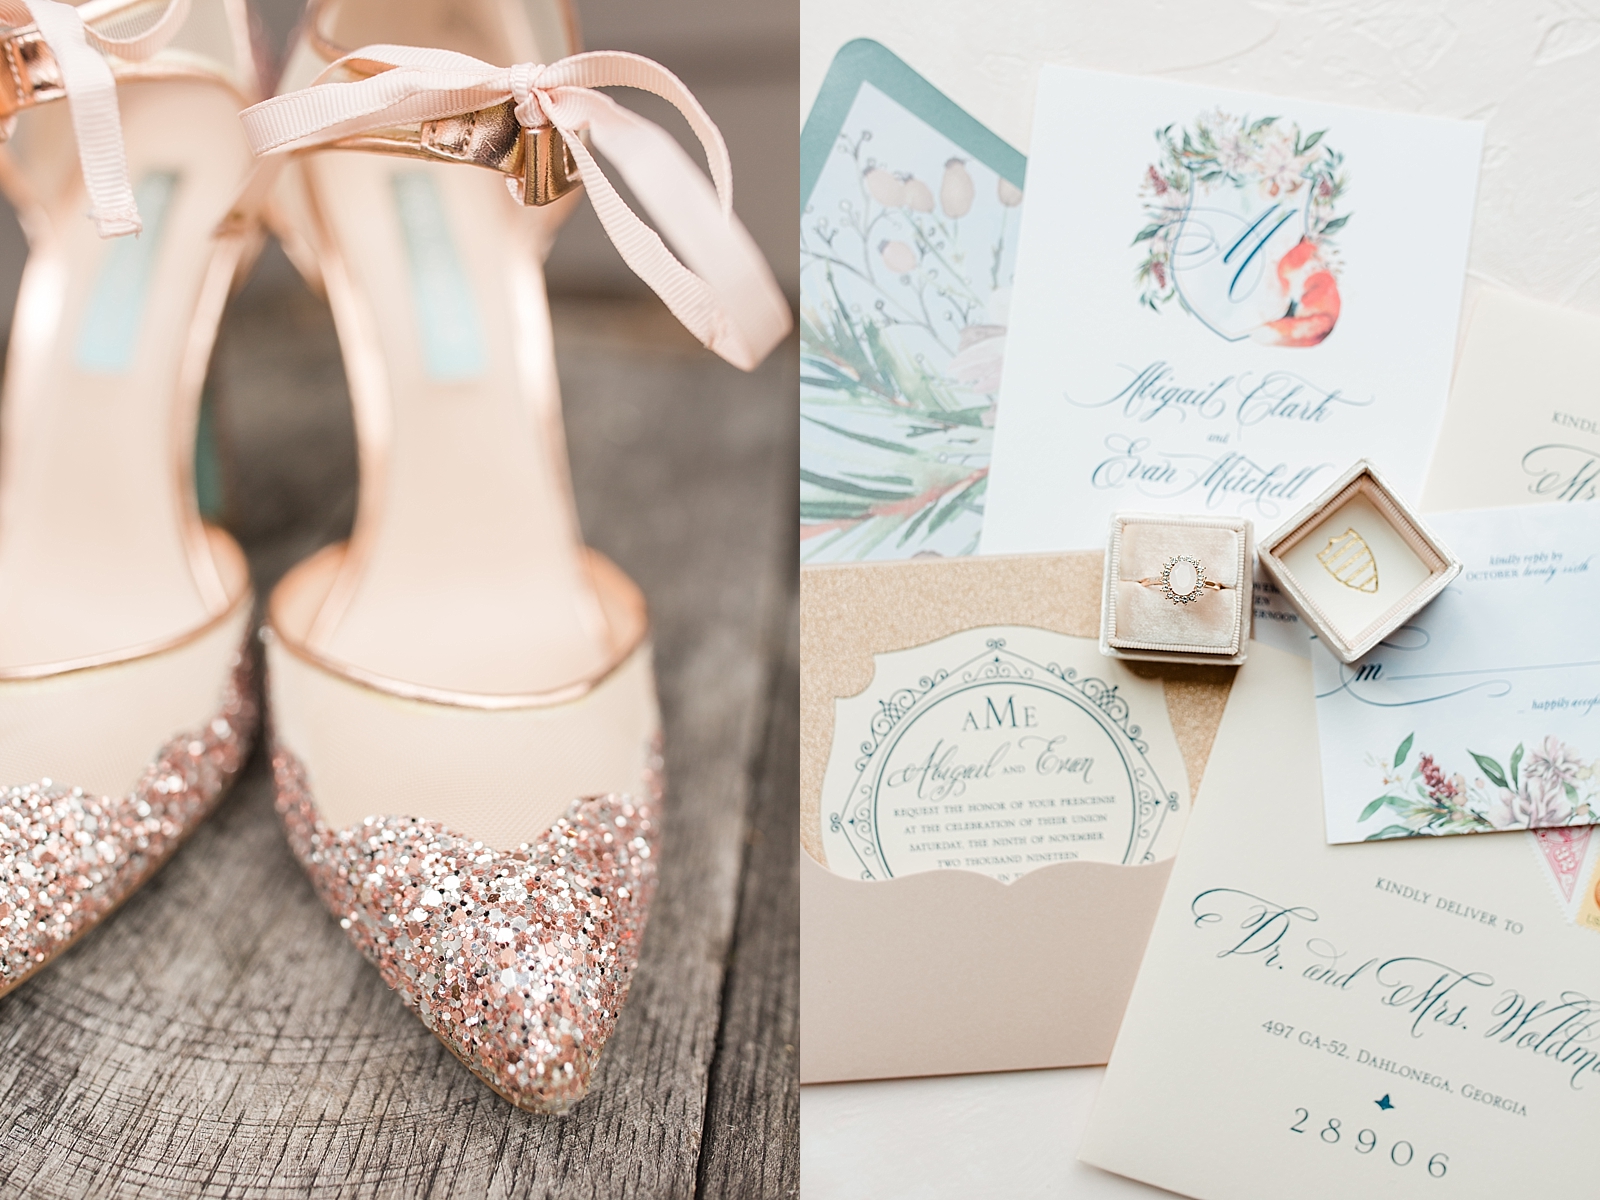 Juliette Chapel Wedding Pink Sparkle Bridal Shoes and invitation suite with ring Photos